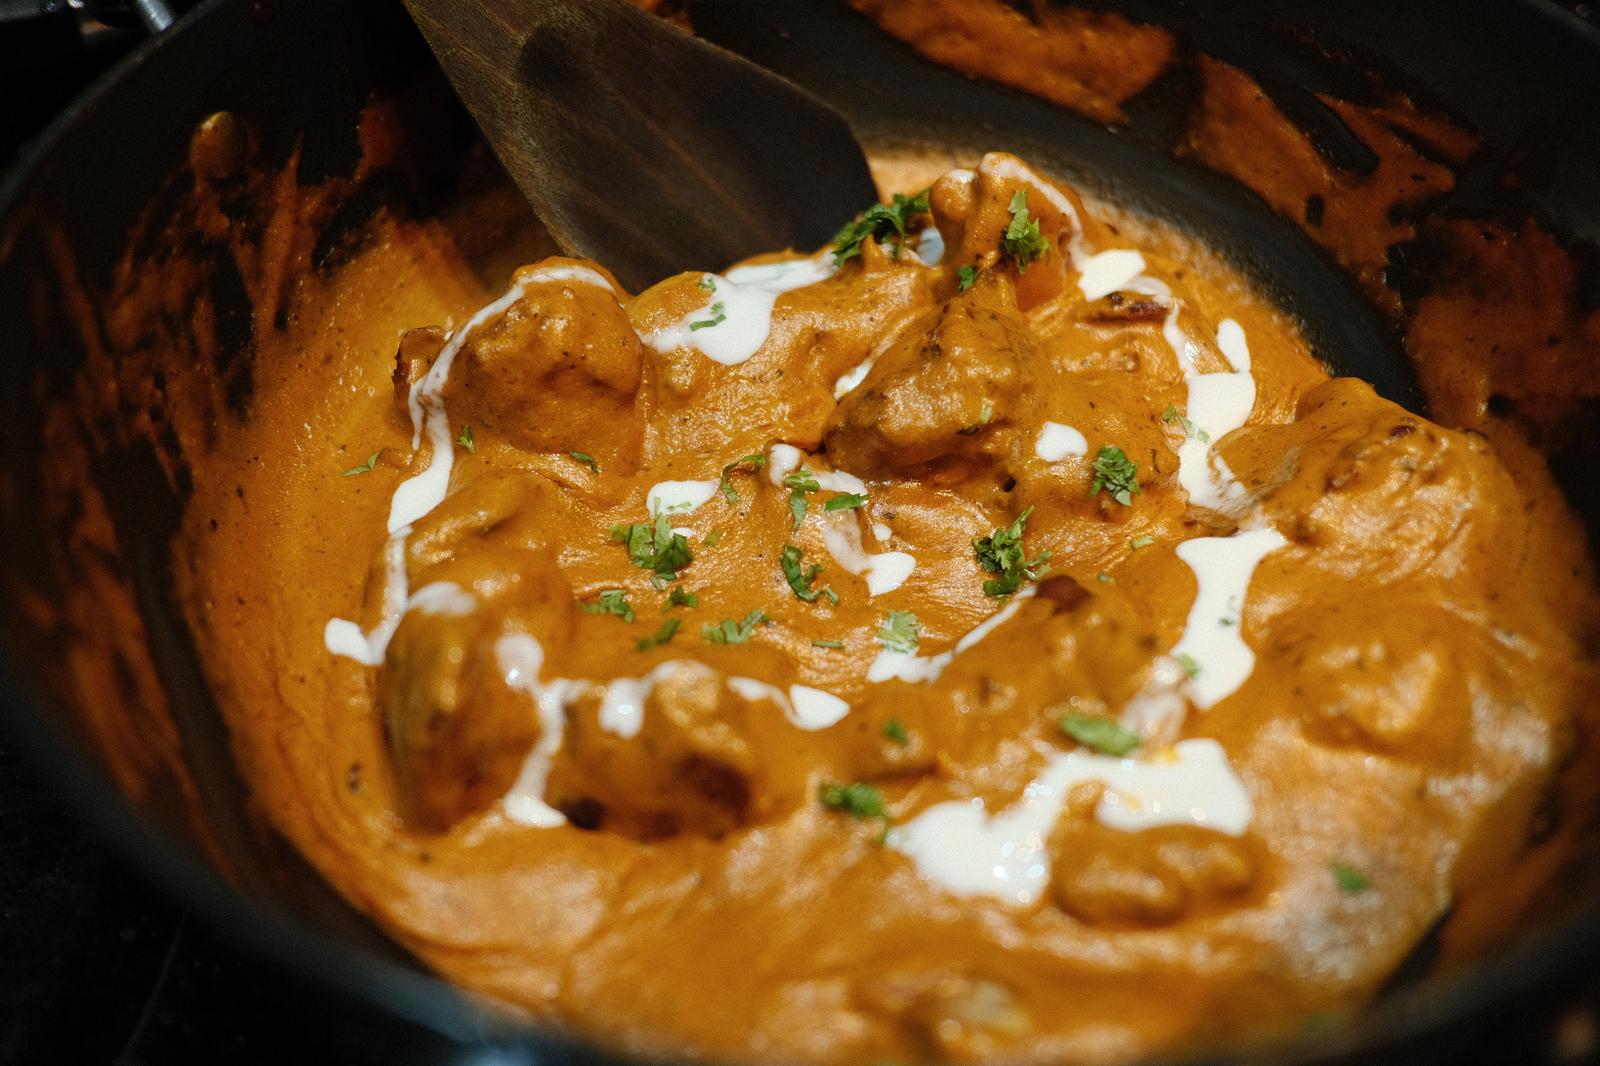 Did You Know I Can Tell How Adventurous You Are Purely by the Assorted International Foods You Choose? Butter chicken